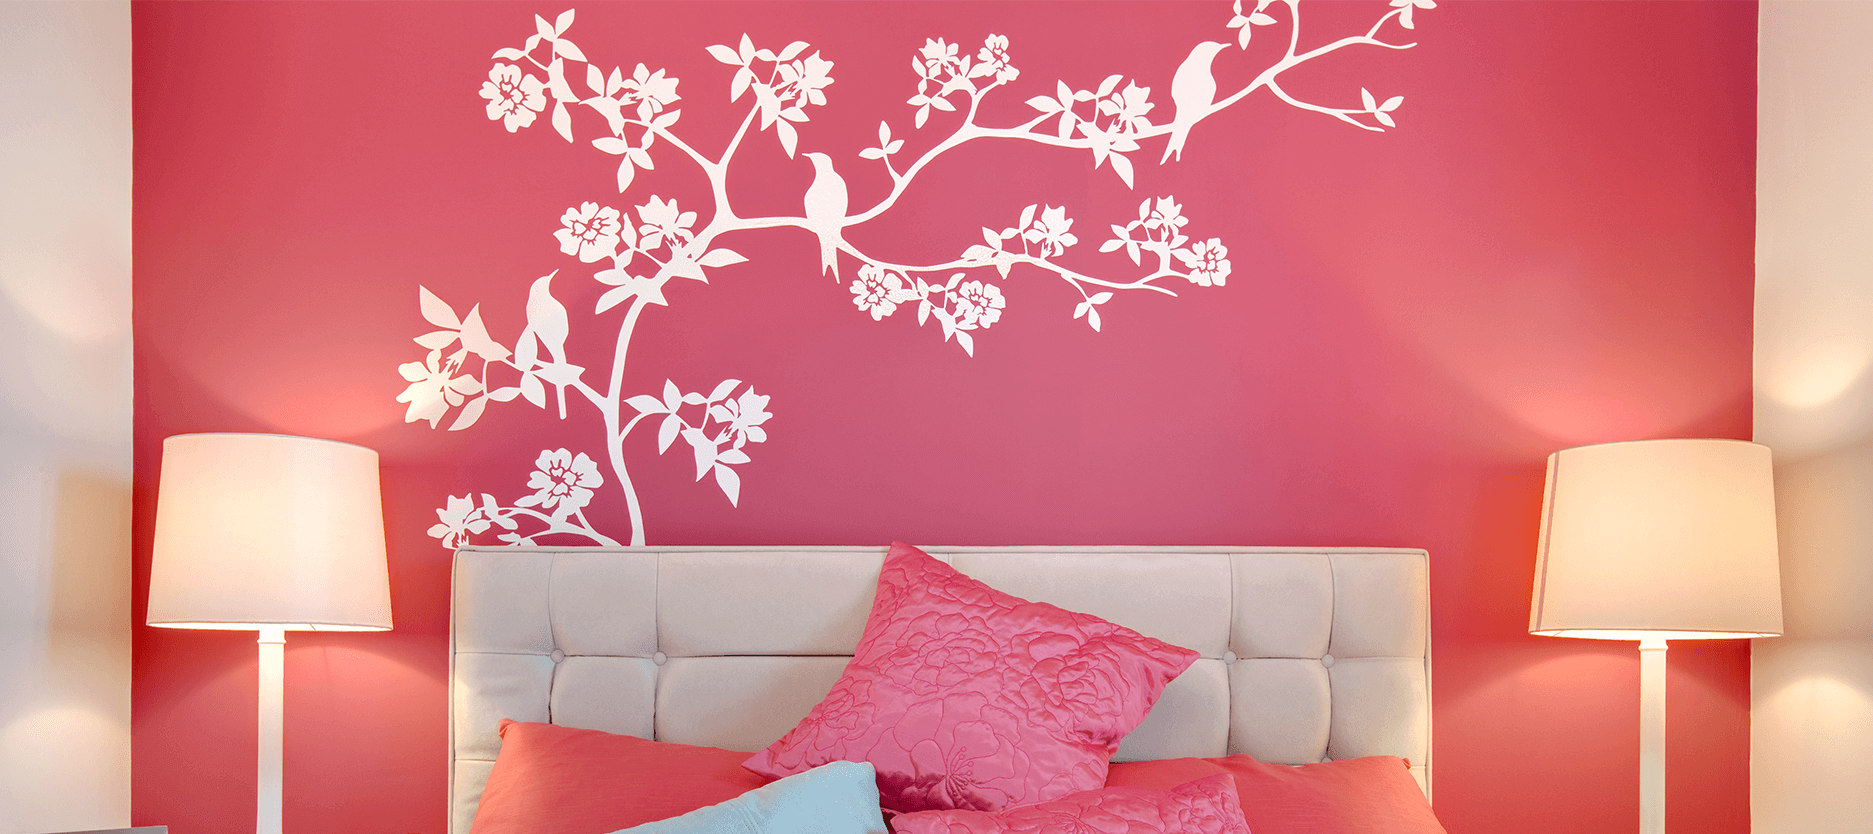 Living Room Wallpaper Trends to Take Inspiration From